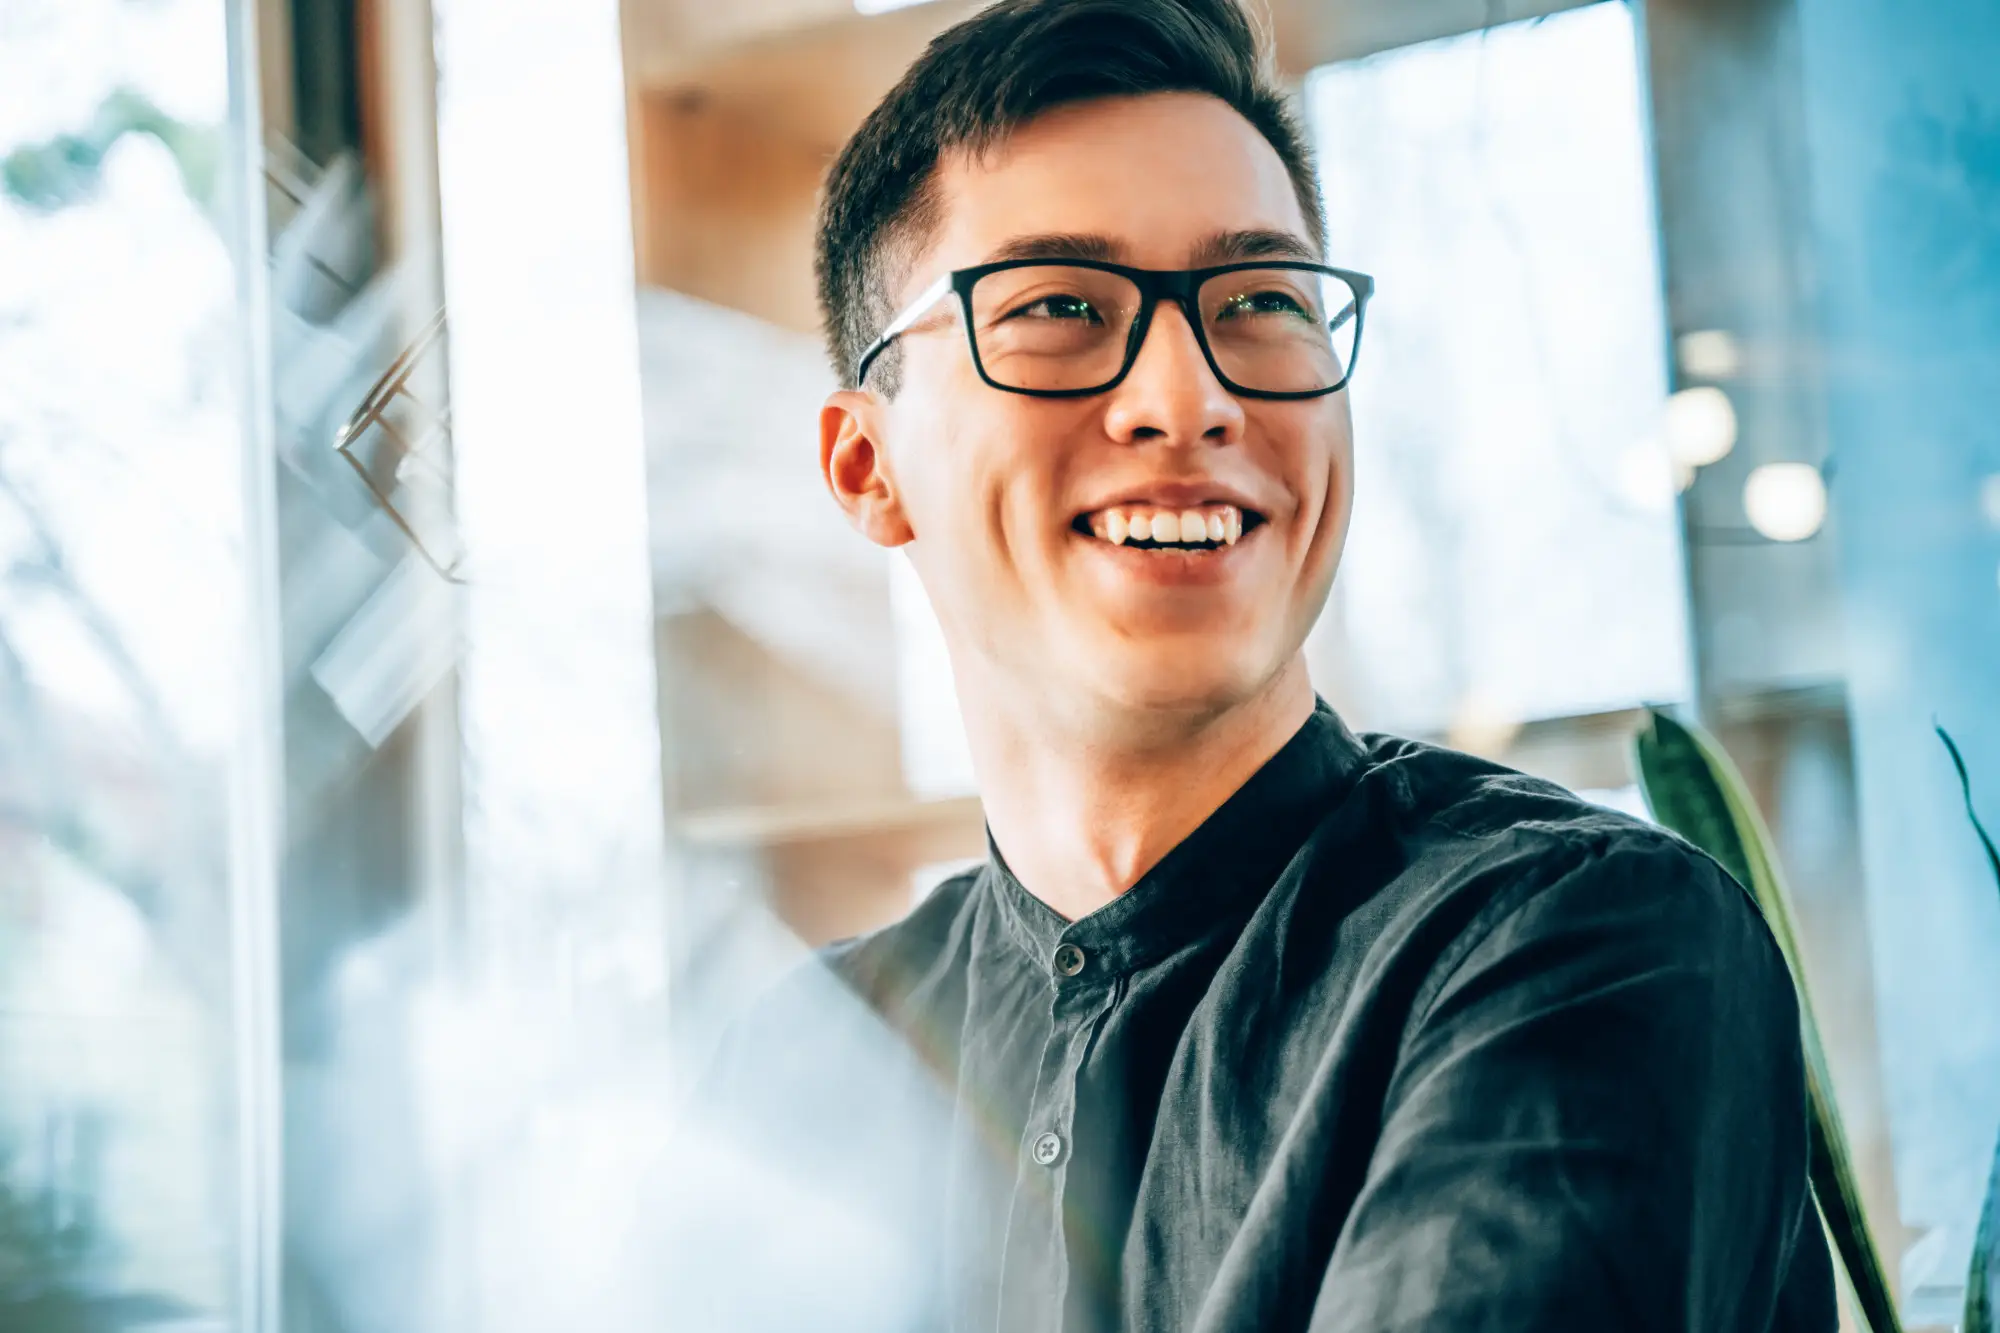 Smiling male in a business setting